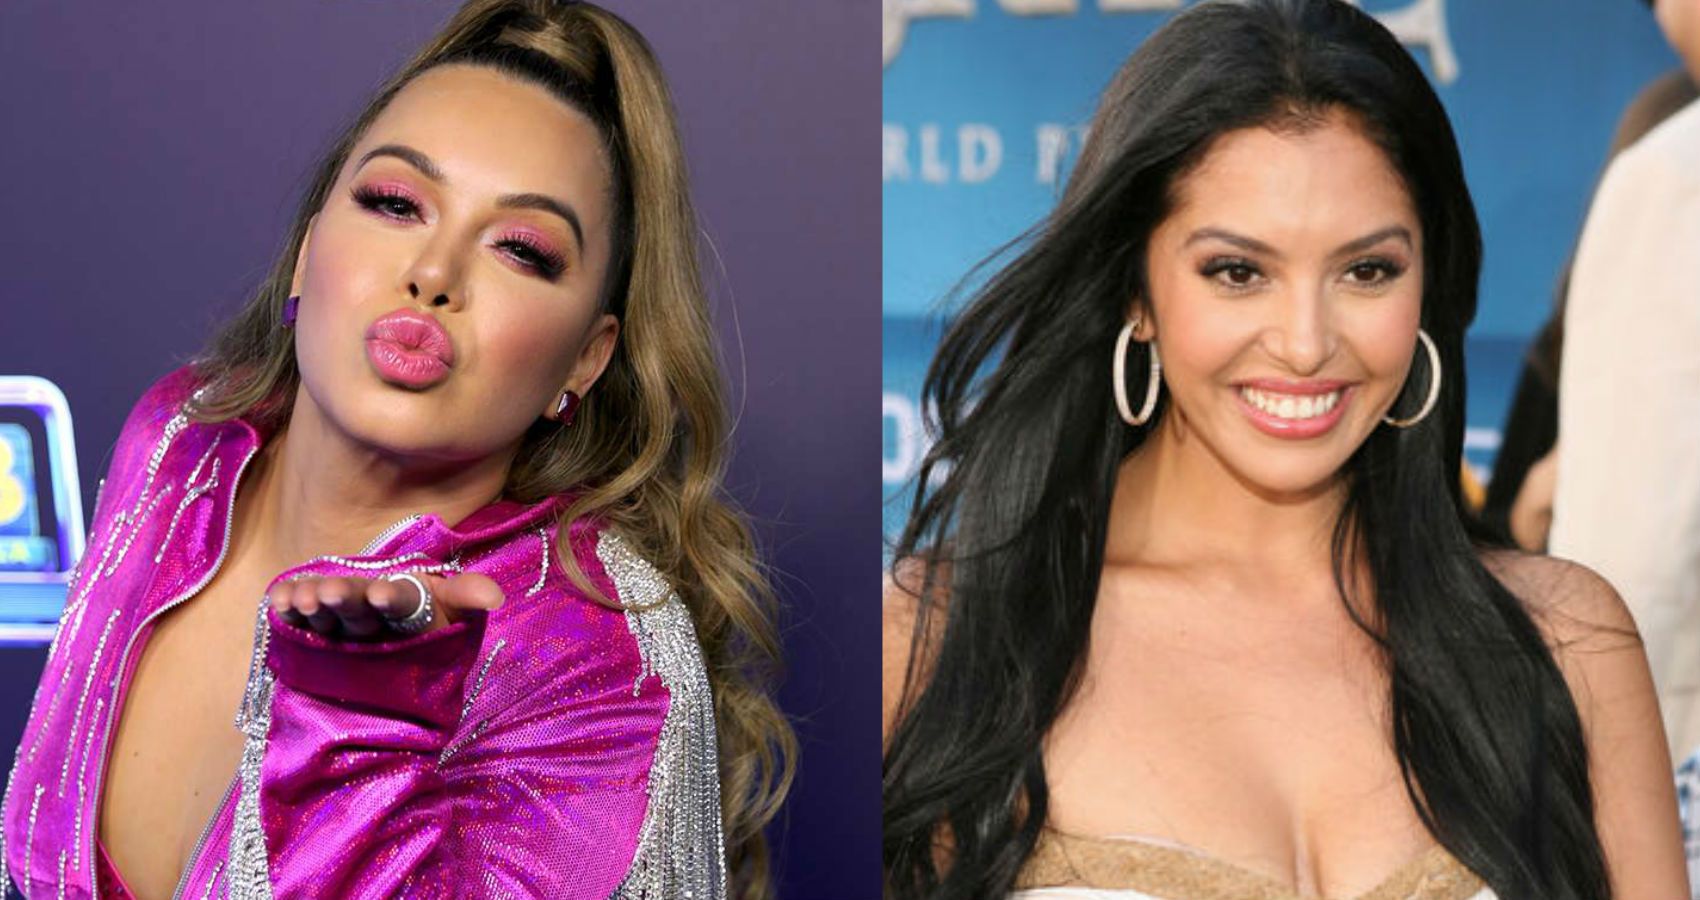 Chiquis Rivera thinks about Vanessa Bryant every day